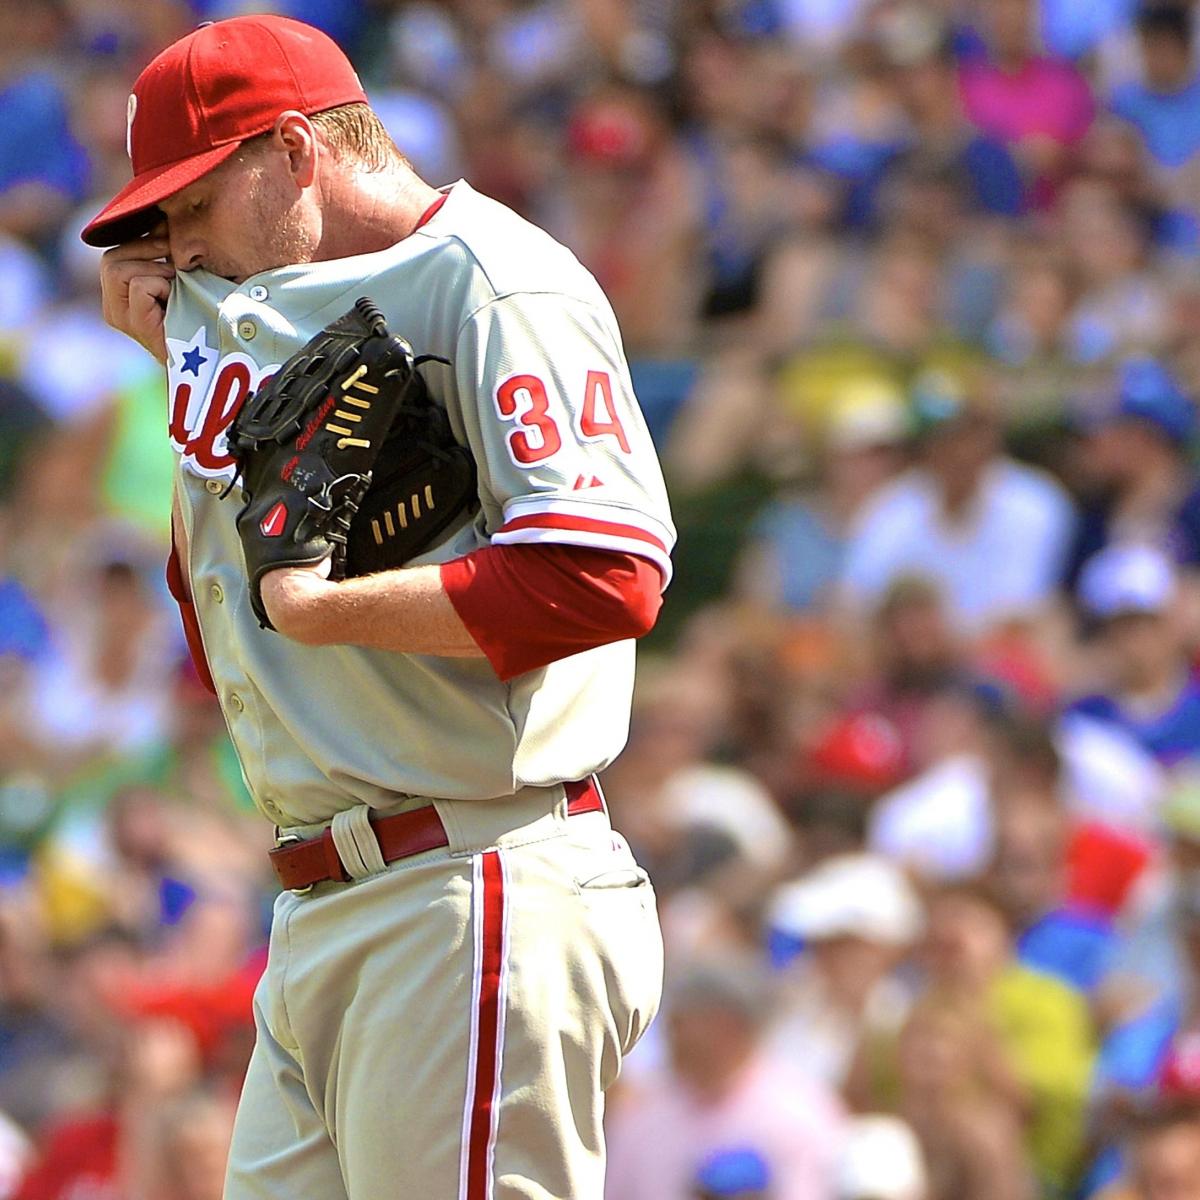 Roy Halladay was a clear Hall of Famer - Beyond the Box Score